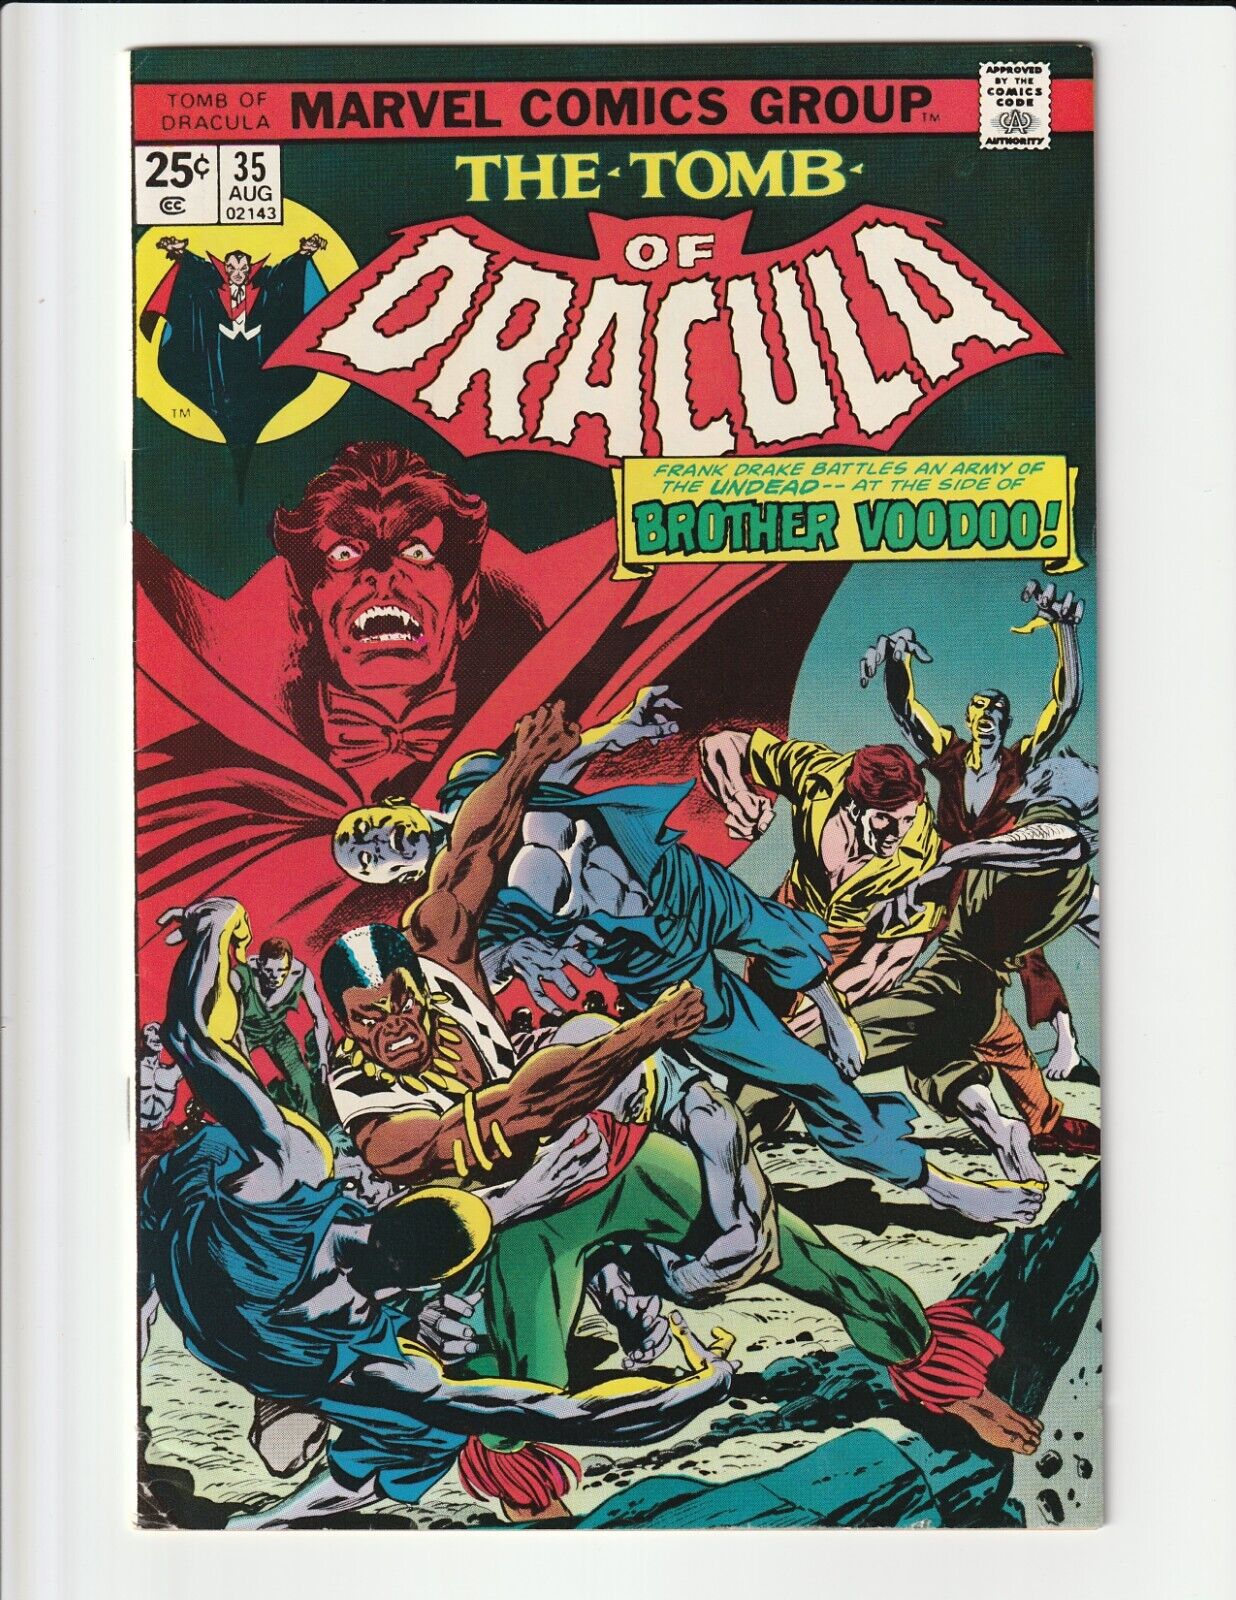 TOMB OF DRACULA #35 (1977) FN BROTHER VOODOO APPEARANCE MARVEL COMICS